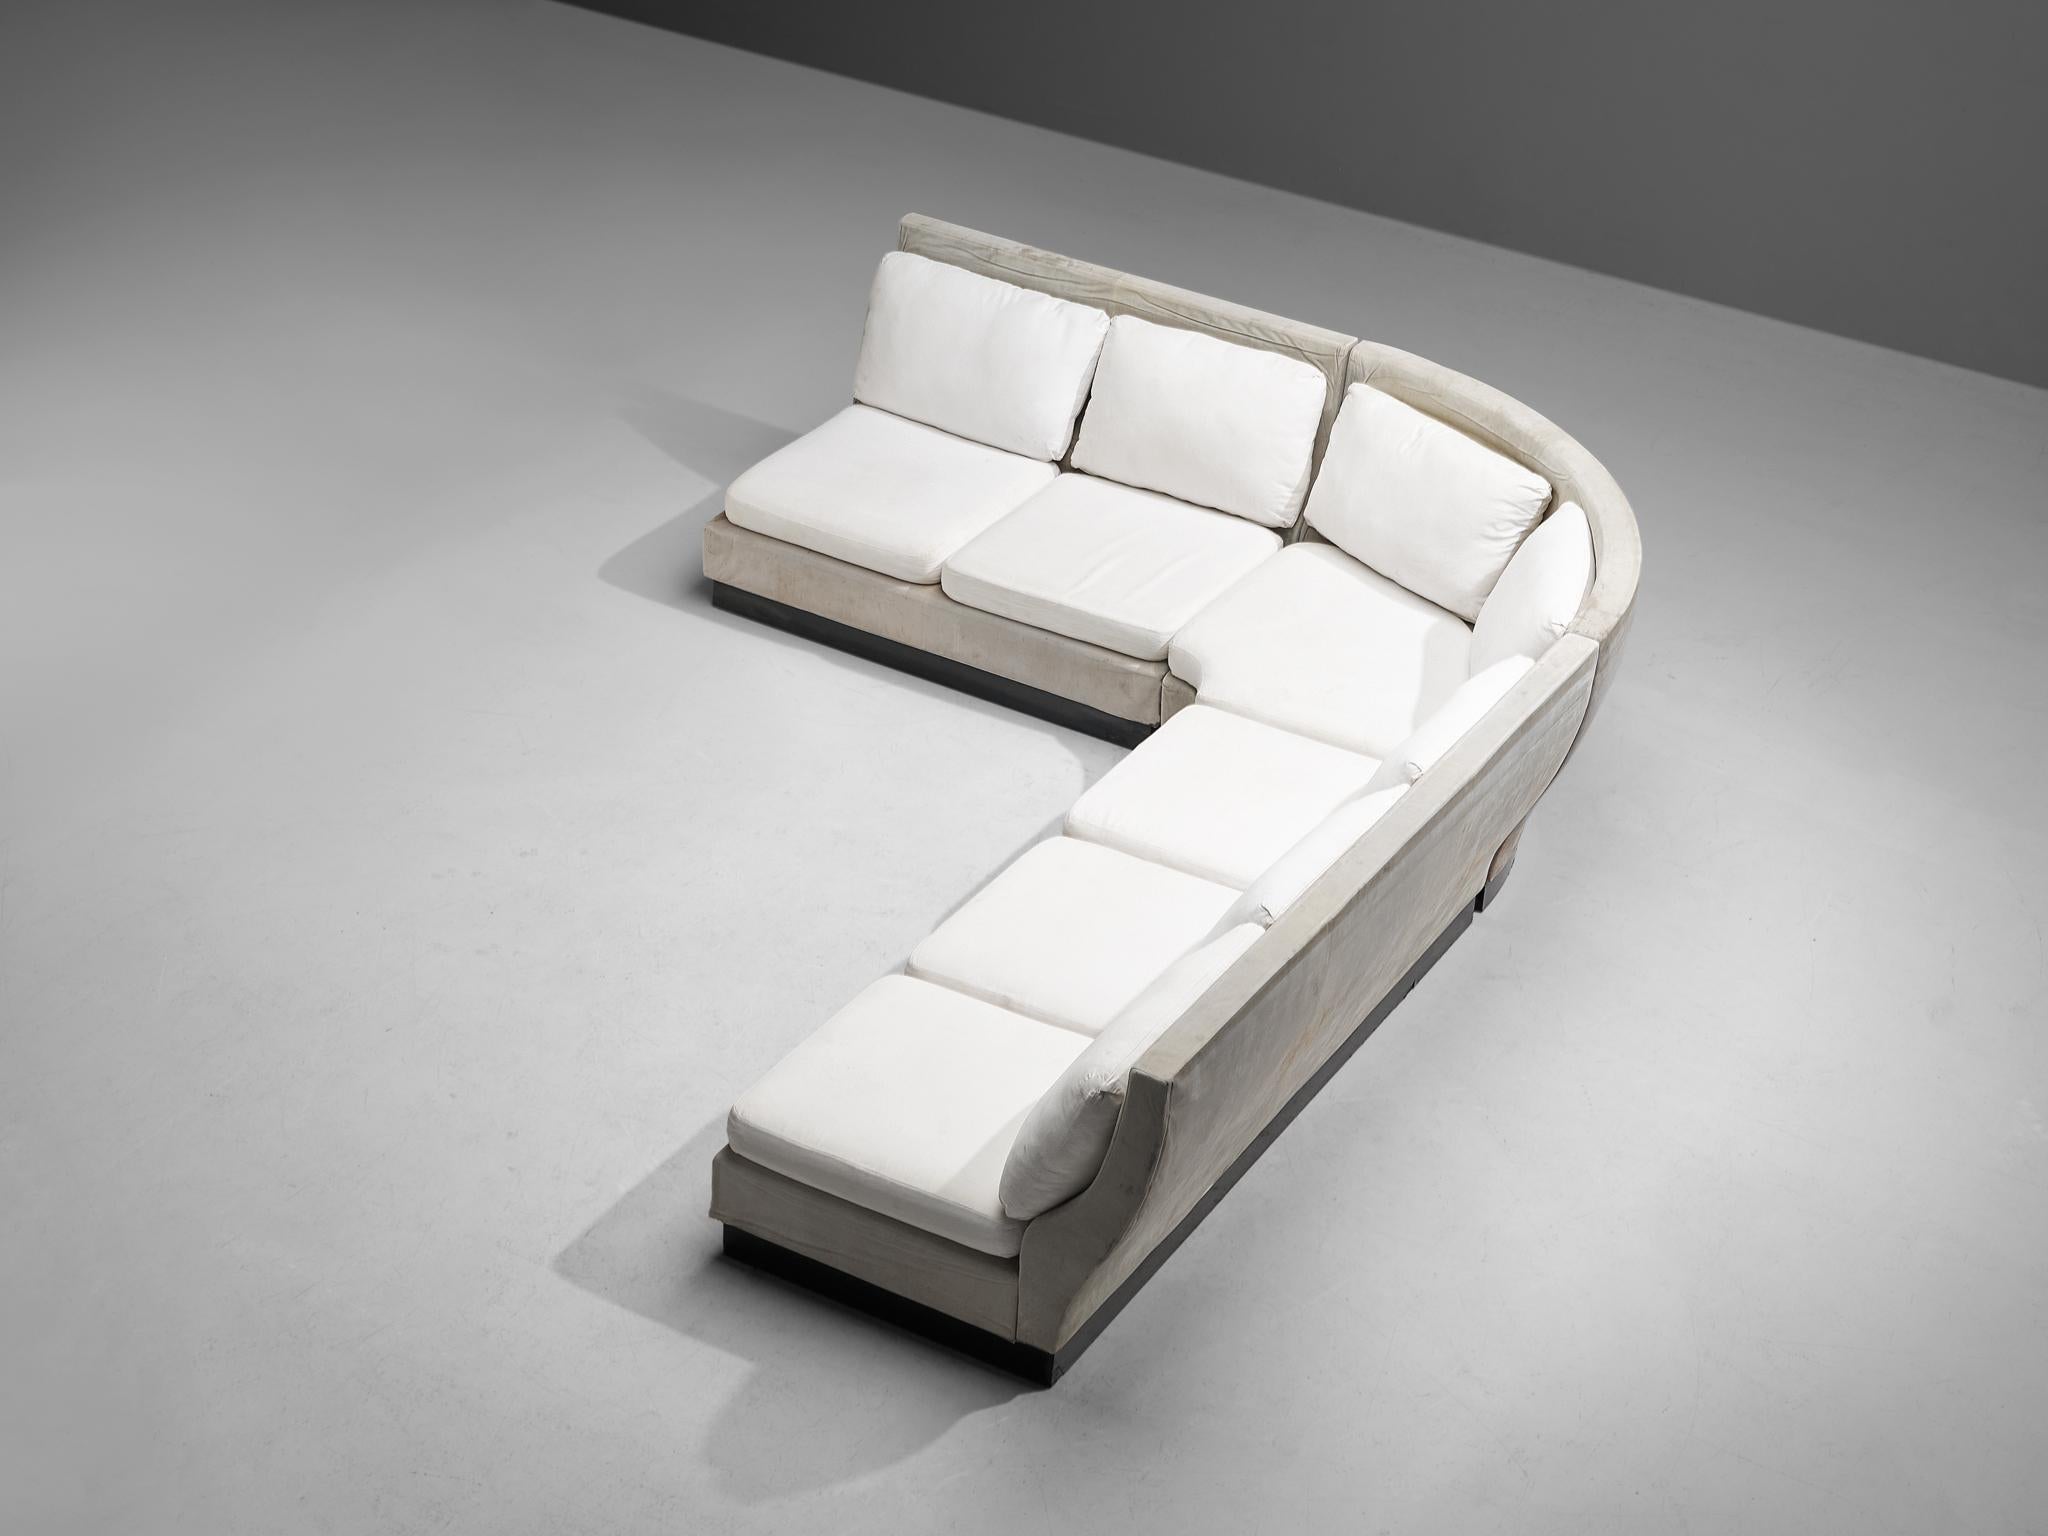 Willy Rizzo for Mario Sabot, sectional corner sofa, fabric, ultrasuede, wood, Italy, 1970s.

This rare sofa is designed by Willy Rizzo and consists of a three-seater, two-seater, and corner element. The cushions are upholstered in a white fabric